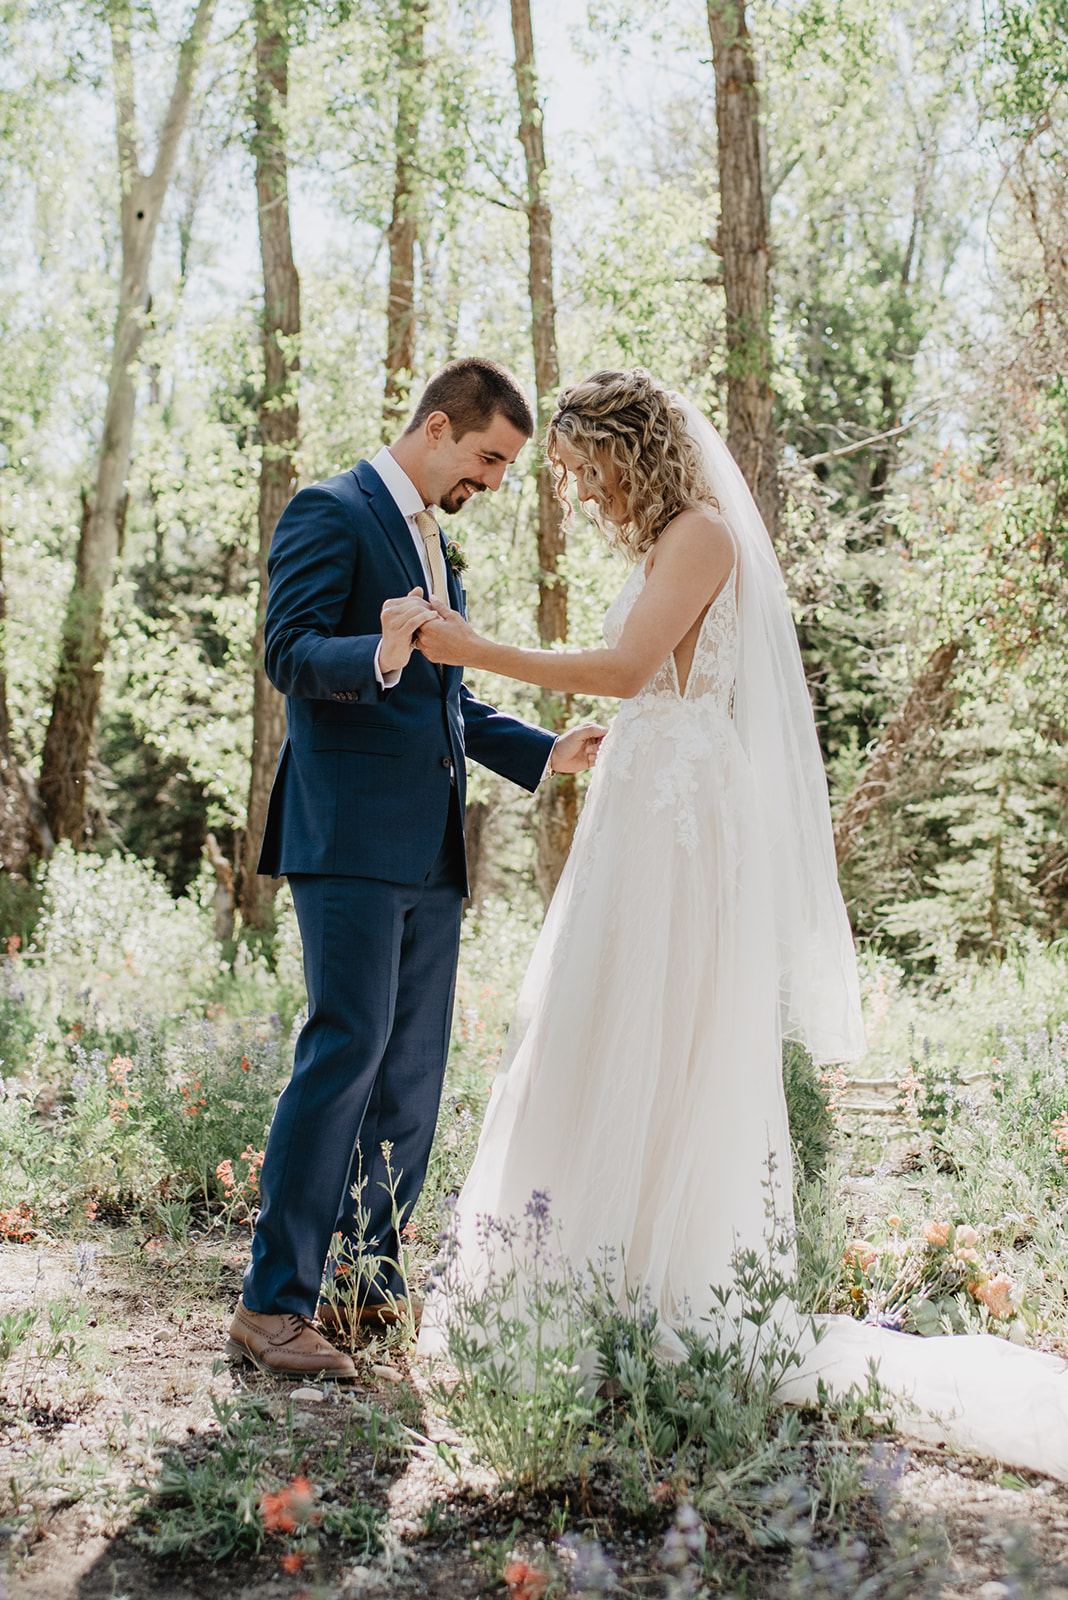 bride and groom holding hands together in JAckson HOle's forest as the groom looks at his brides lace white wedding dress